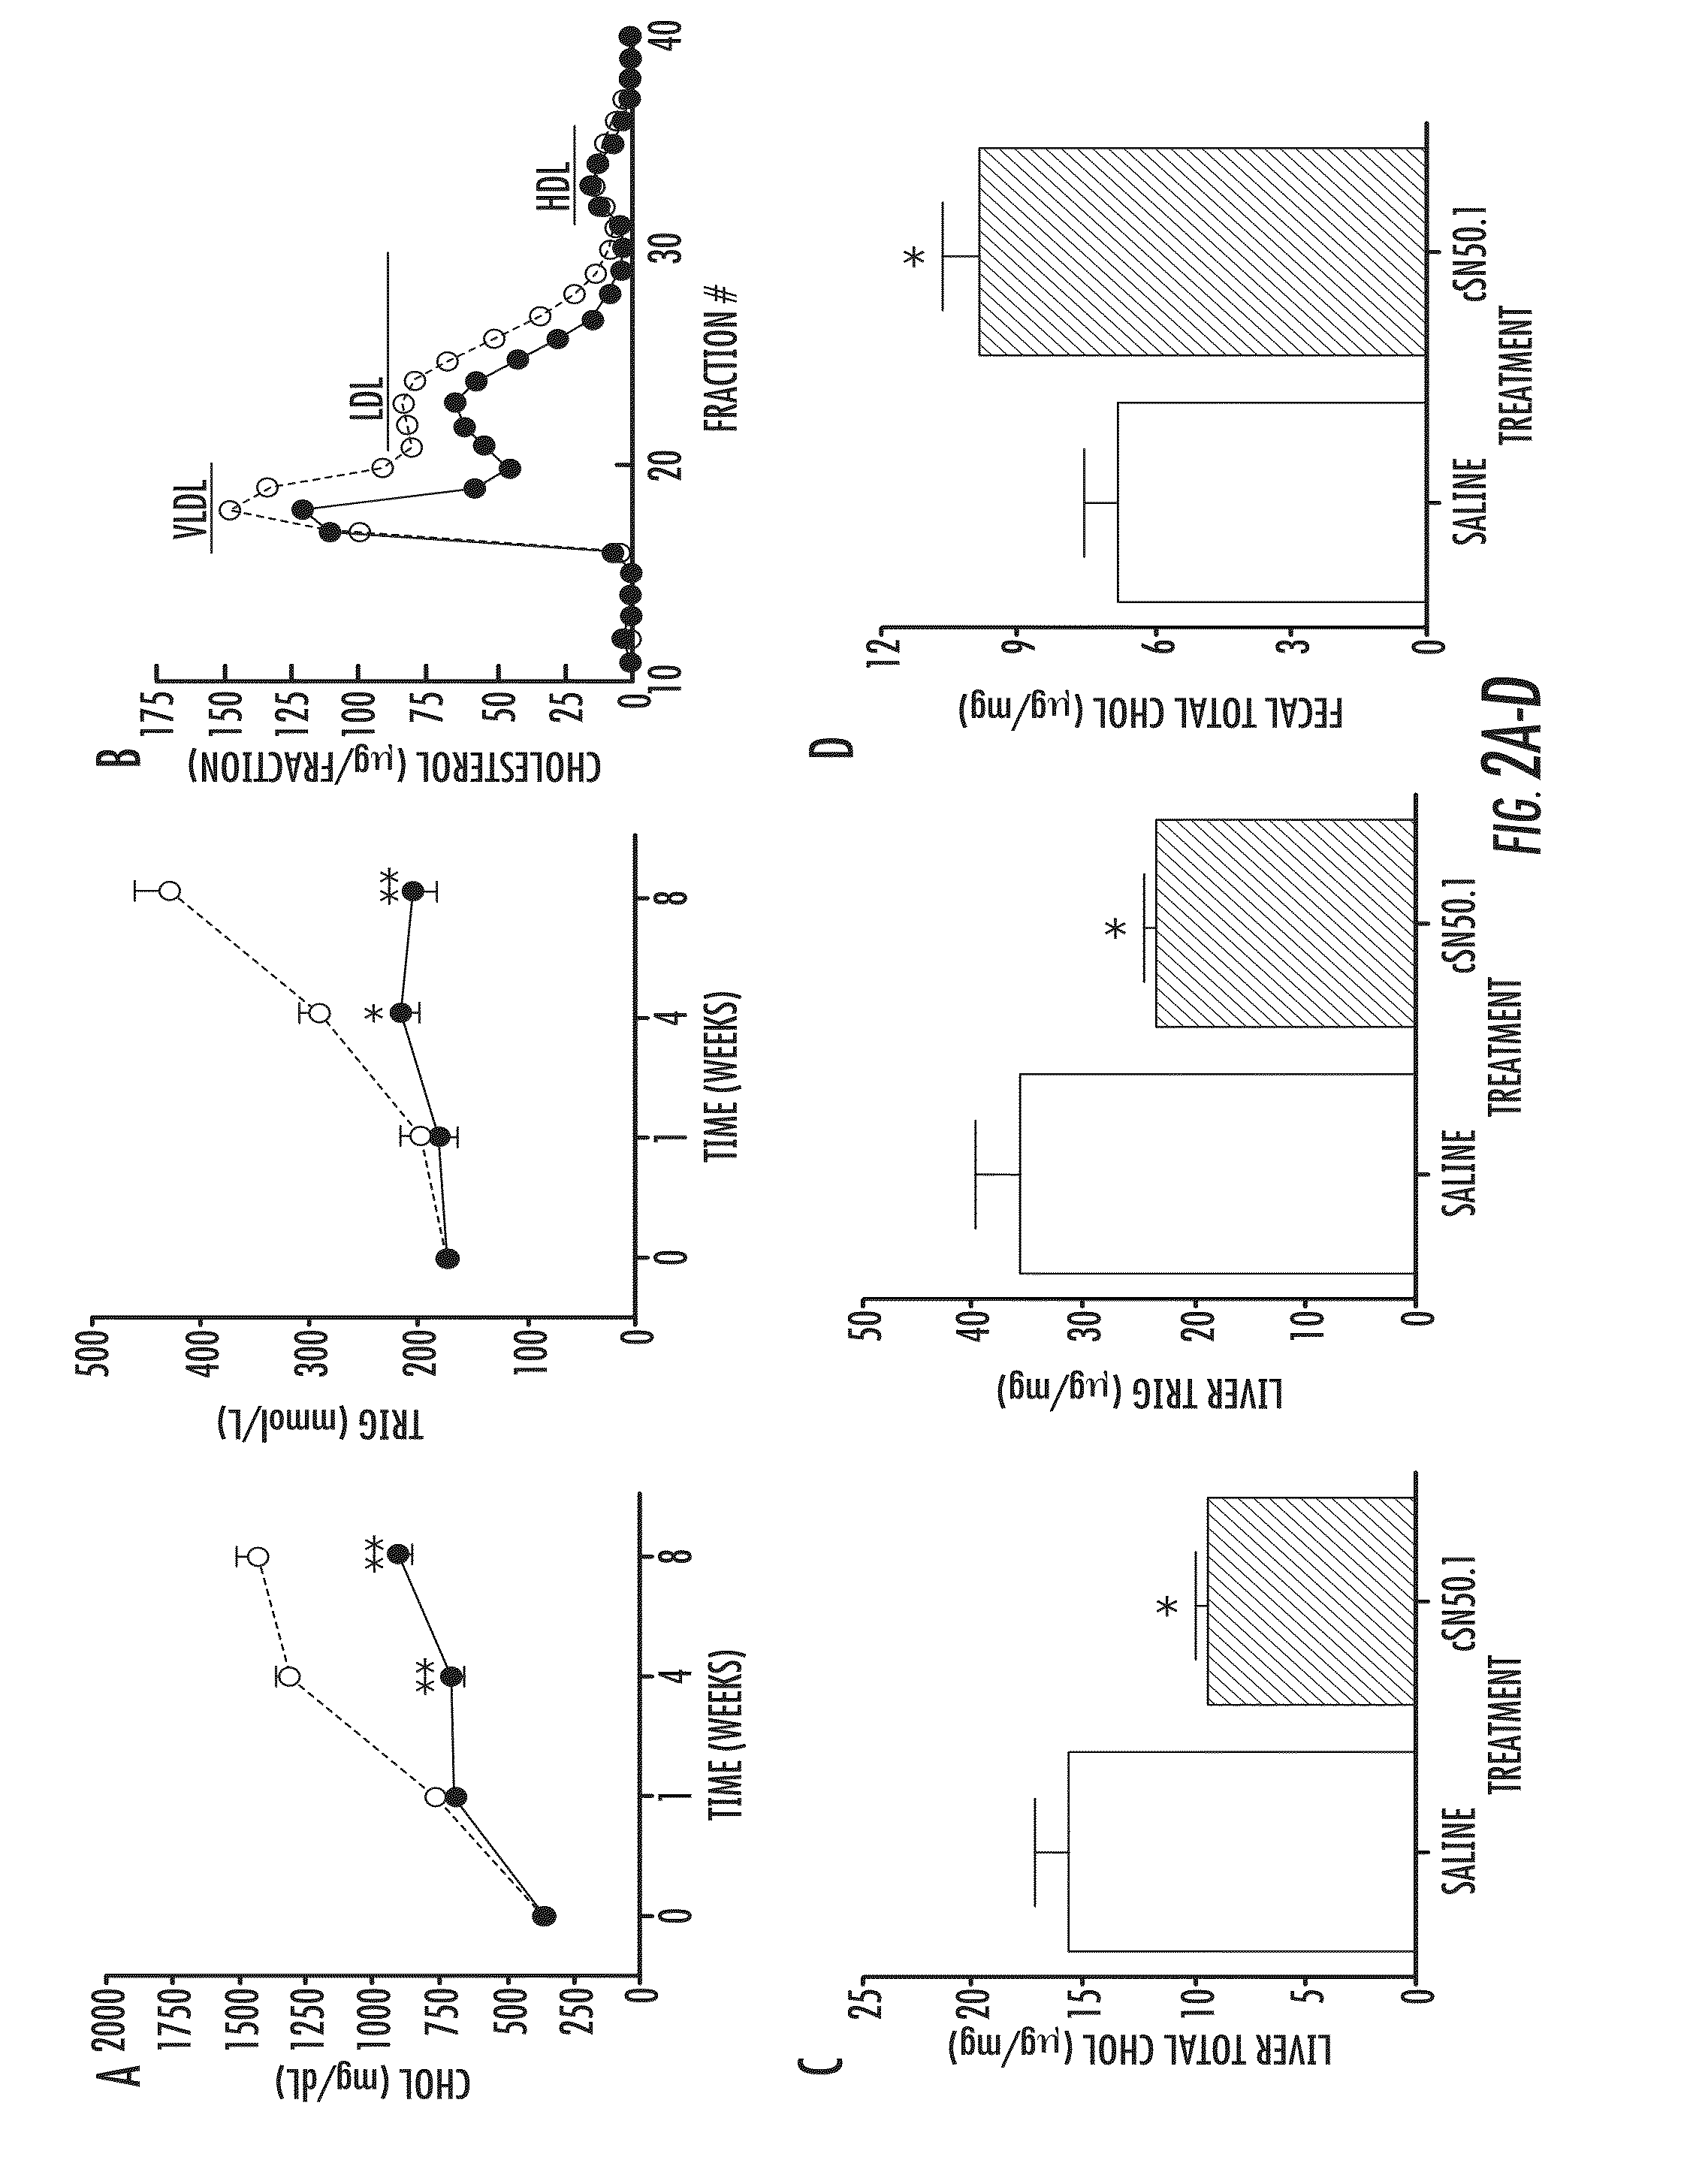 Compositions and methods for treating and preventing hyperlipidemia, fatty liver, atherosclerosis and other disorders associated with metabolic syndrome